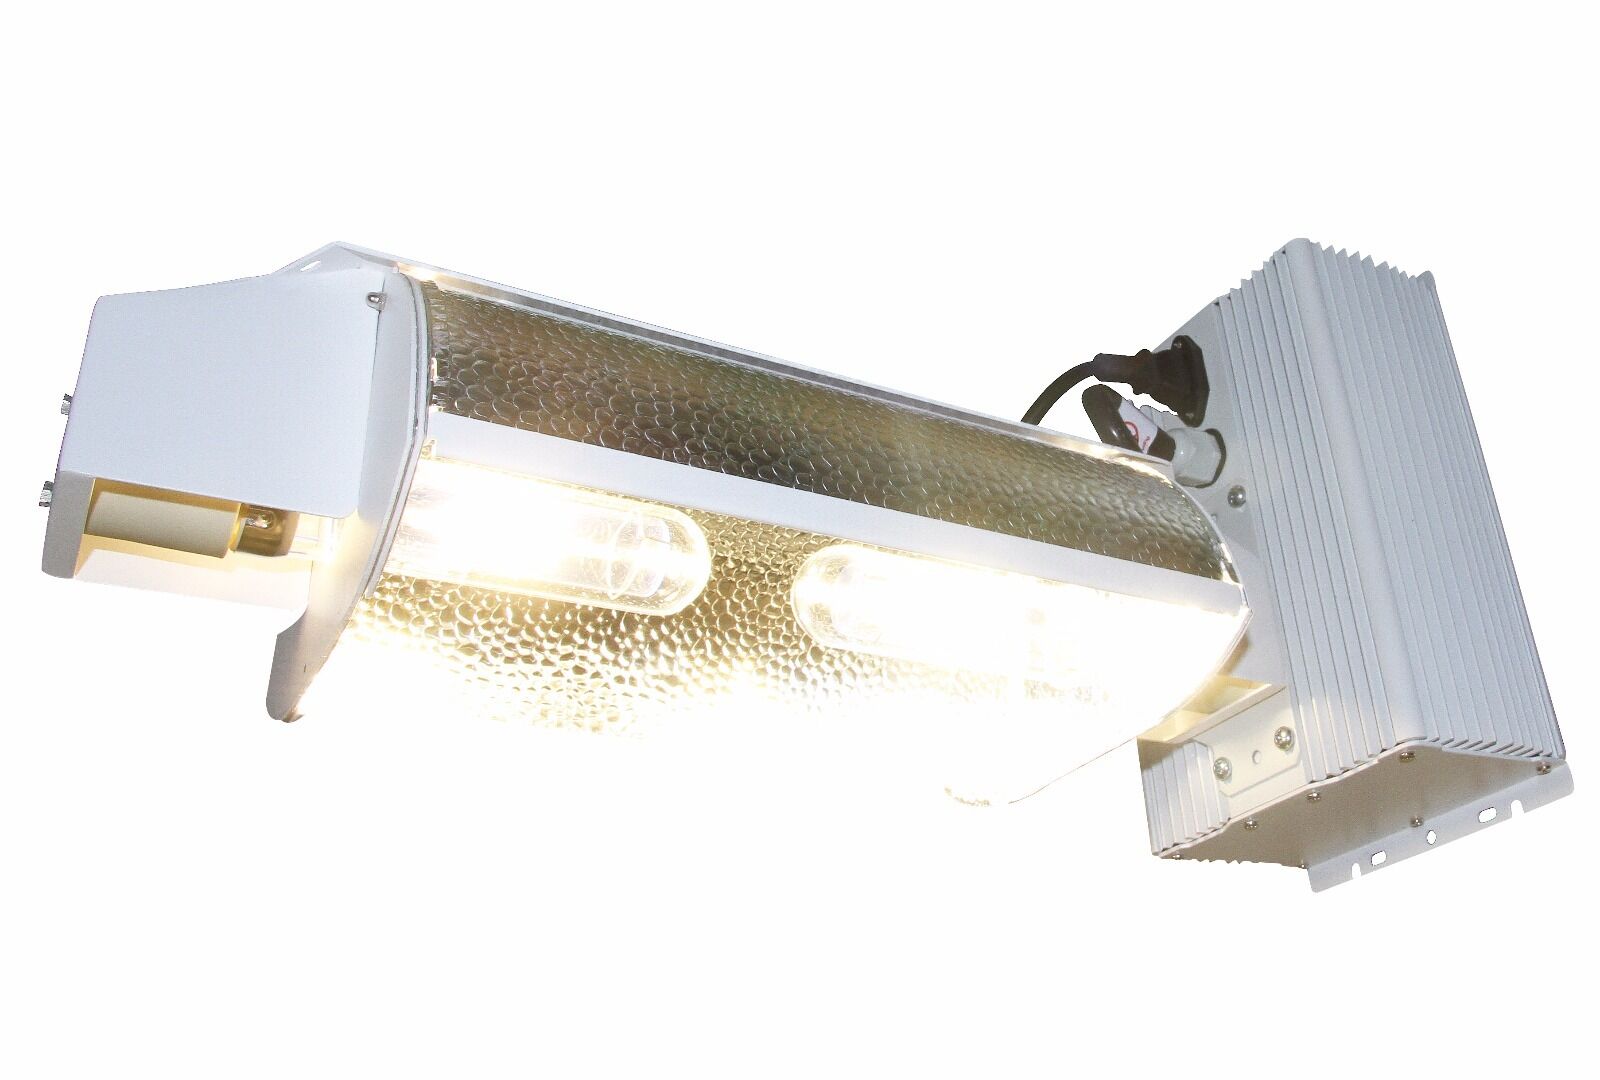 Hydroponic grow light 630w CMH 2 BULBS INCLUDED IN PRICE